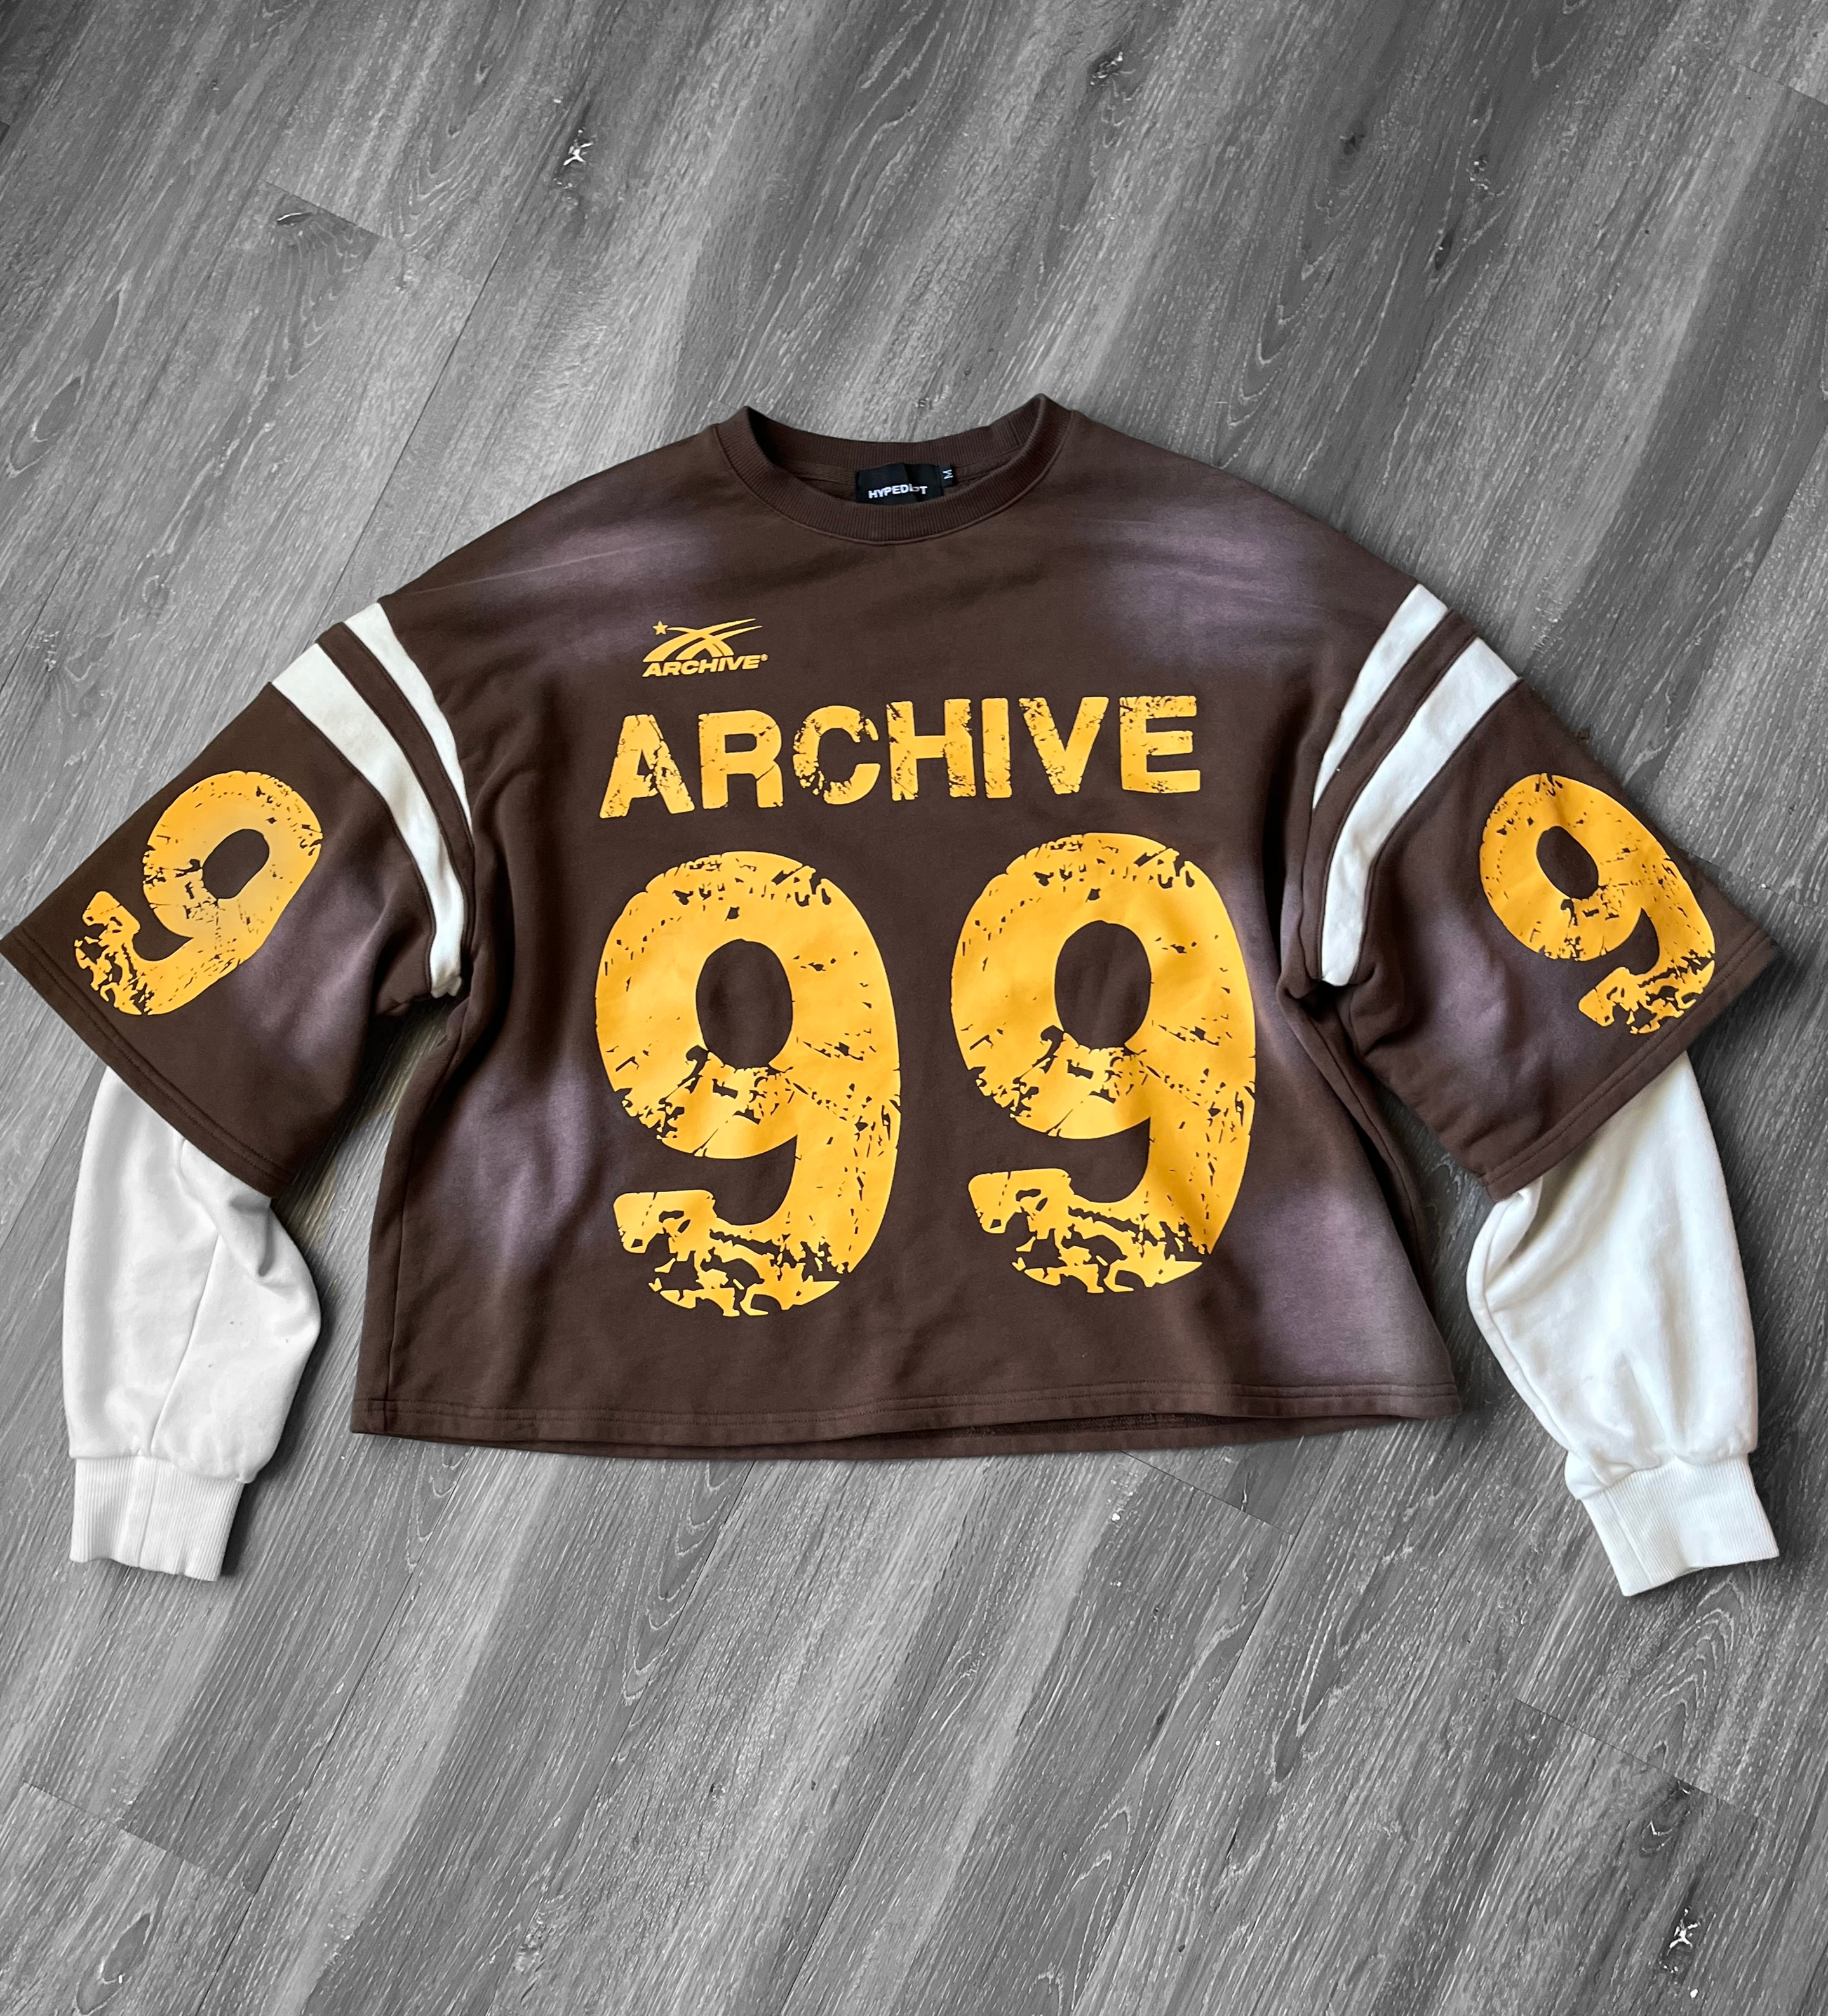 ARCHIVE #99 BROWN DOUBLE SLEEVED SHIRT